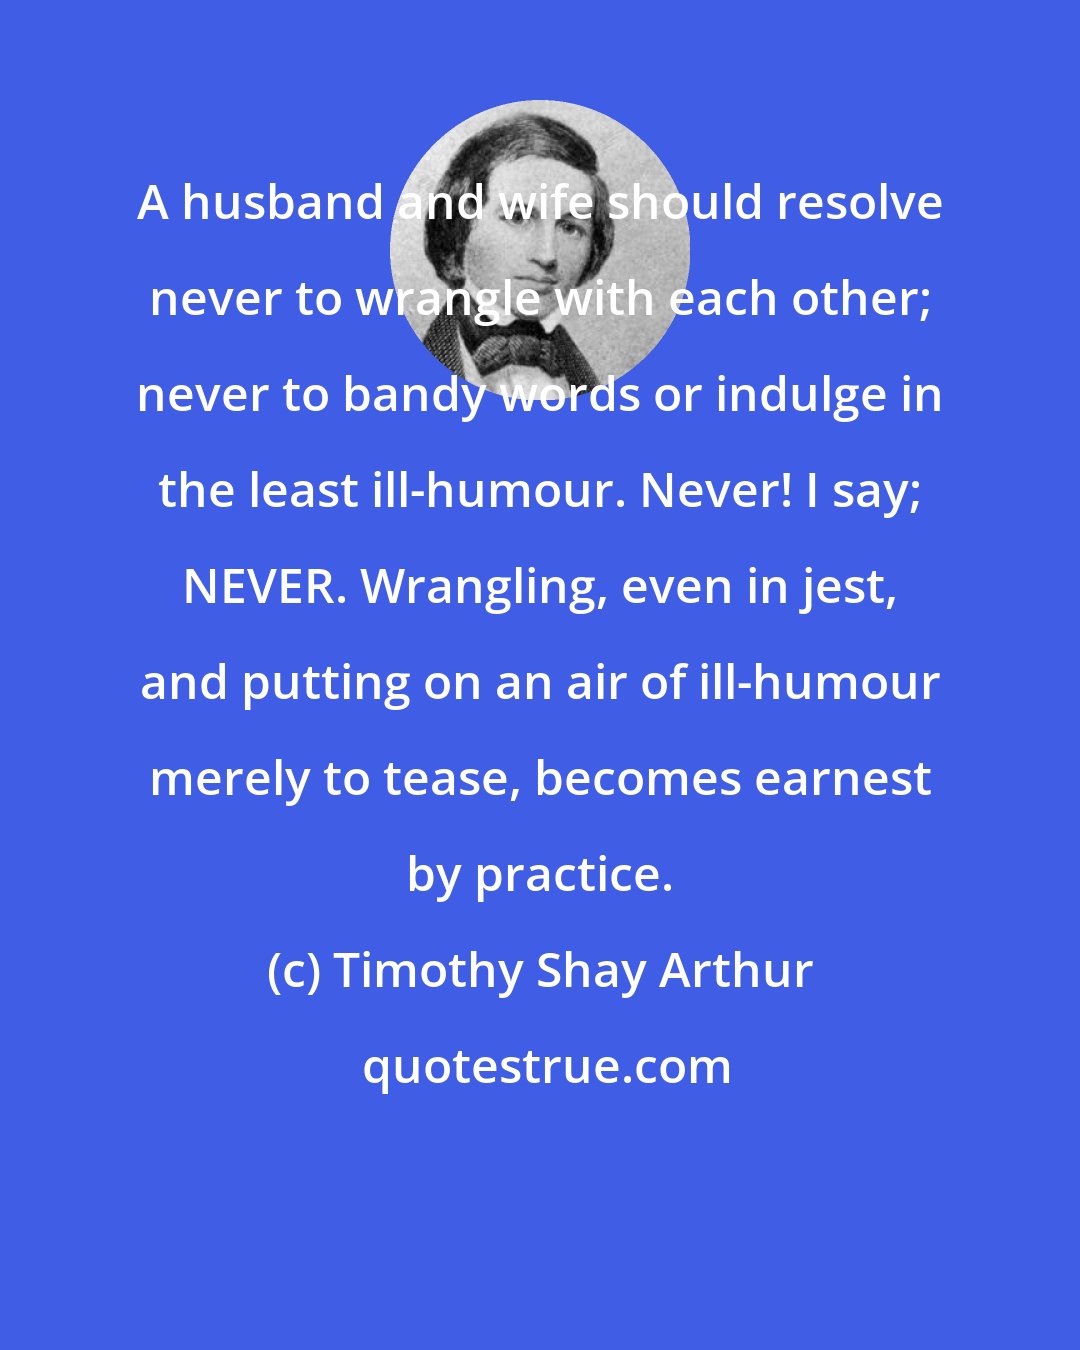 Timothy Shay Arthur: A husband and wife should resolve never to wrangle with each other; never to bandy words or indulge in the least ill-humour. Never! I say; NEVER. Wrangling, even in jest, and putting on an air of ill-humour merely to tease, becomes earnest by practice.